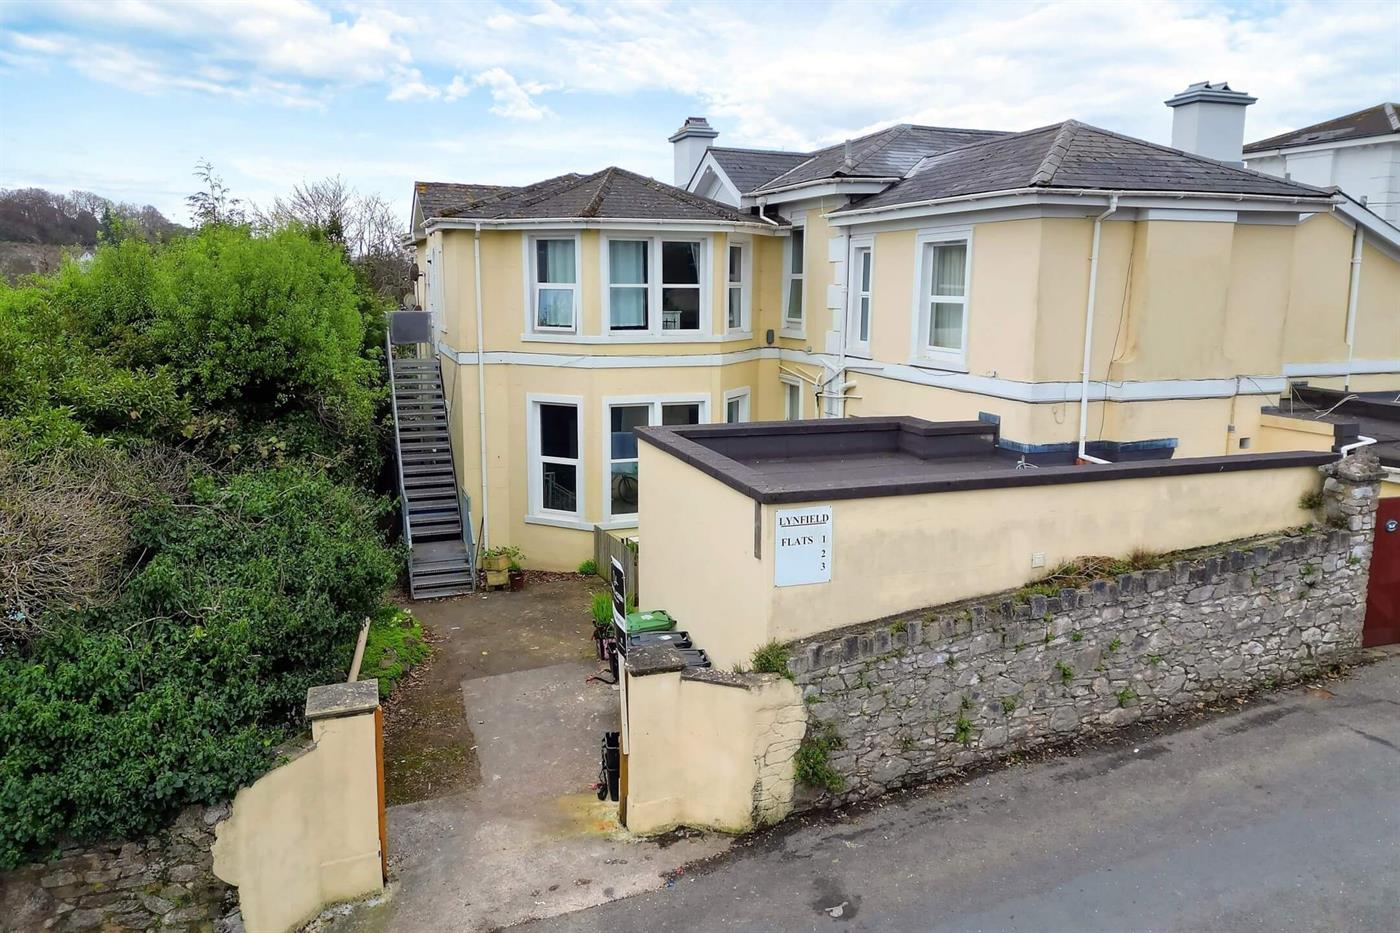 2 Bedroom Apartment to Rent: Lynfield, Middle Warberry Road, Torquay, TQ1 1RN